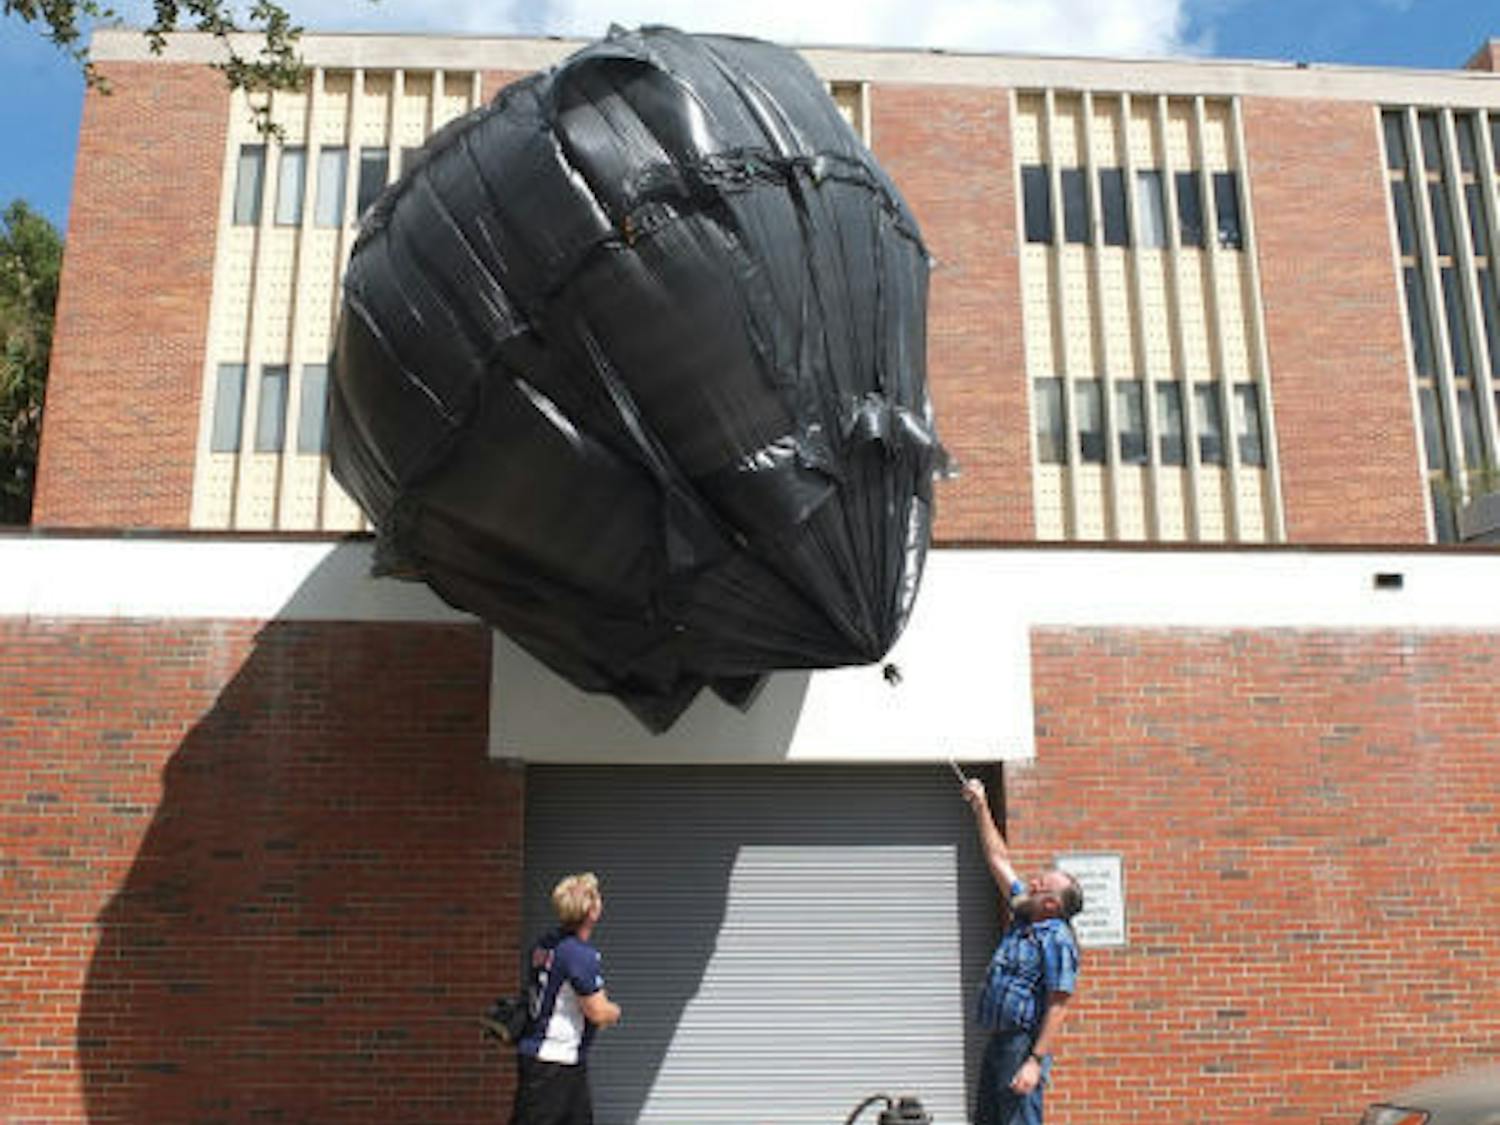 Brad Smith, 57, helps UF junior sculpture student JT Smalley, 36, control a balloon made out of trash bags outside of Fine Arts Building C Thursday morning. The project, designed and created by Smalley for a sculpture assignment, is powered entirely by heat and air.